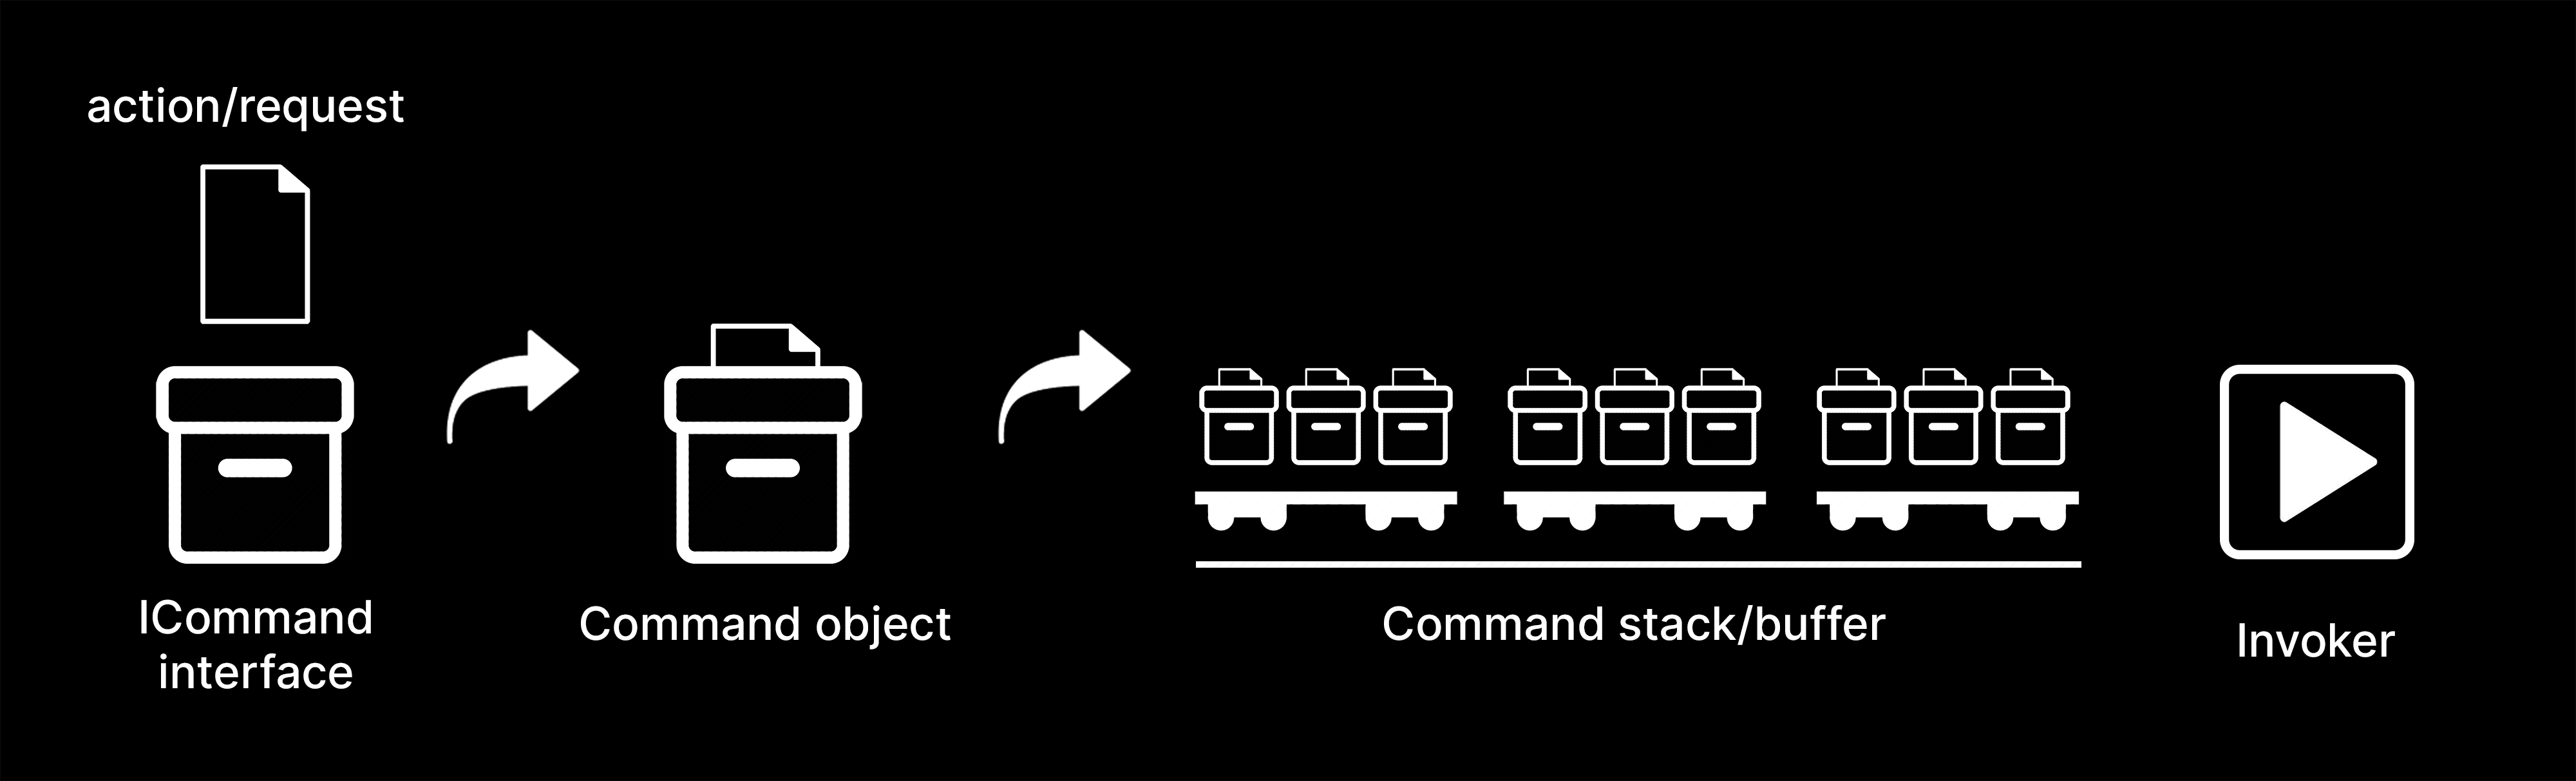 An illustration of the command diagram